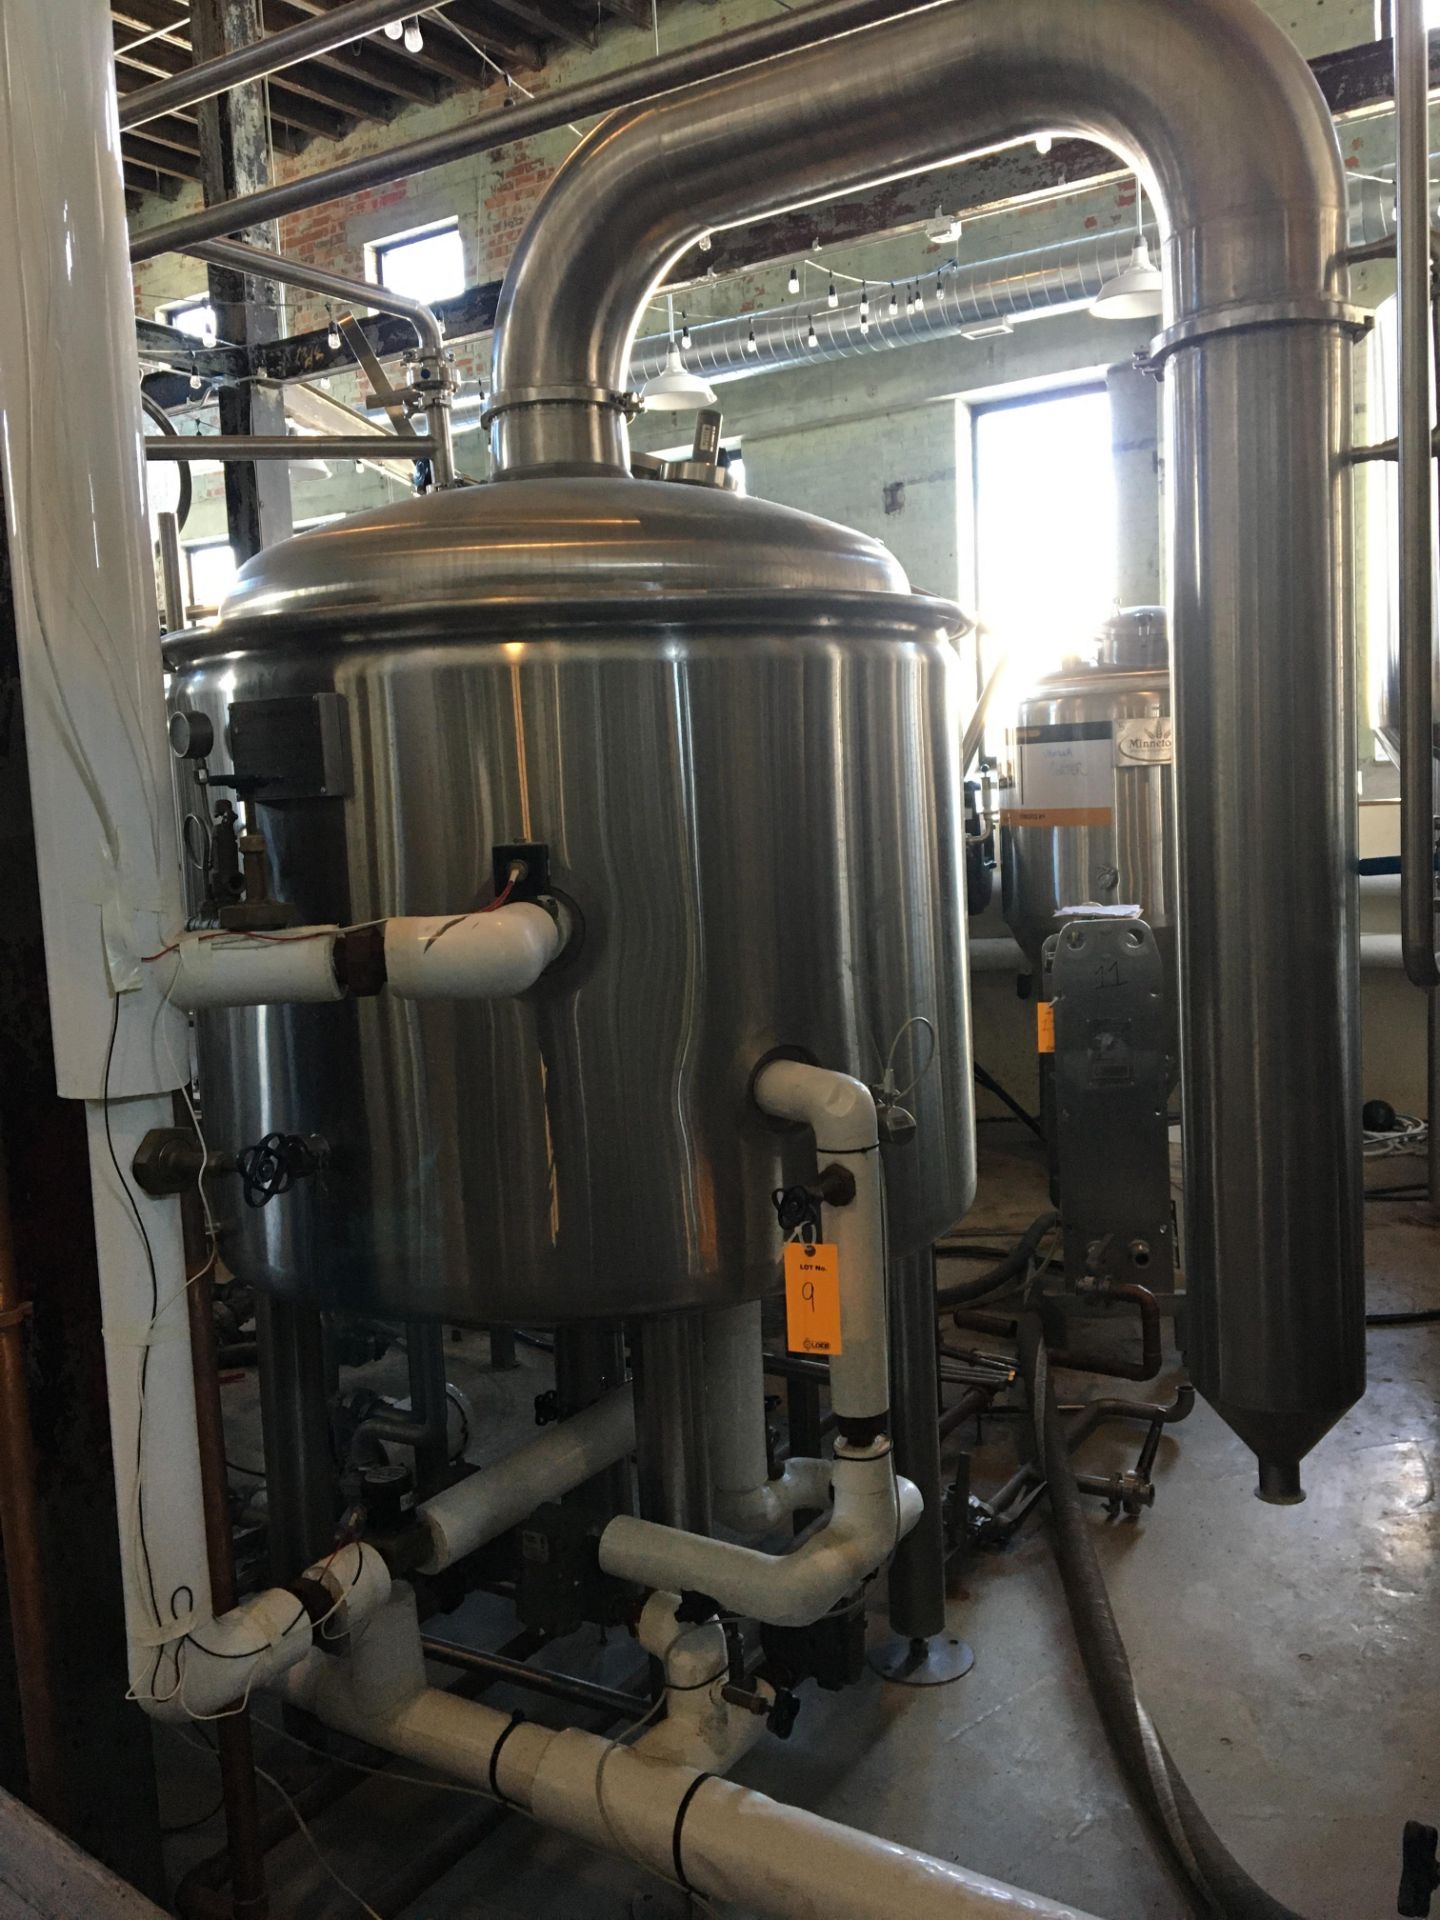 Complete 5 BBL Brewhouse Including 5-BBL Minnetonka Brew kettle/Whirlpool Tank, Stainless Steel;